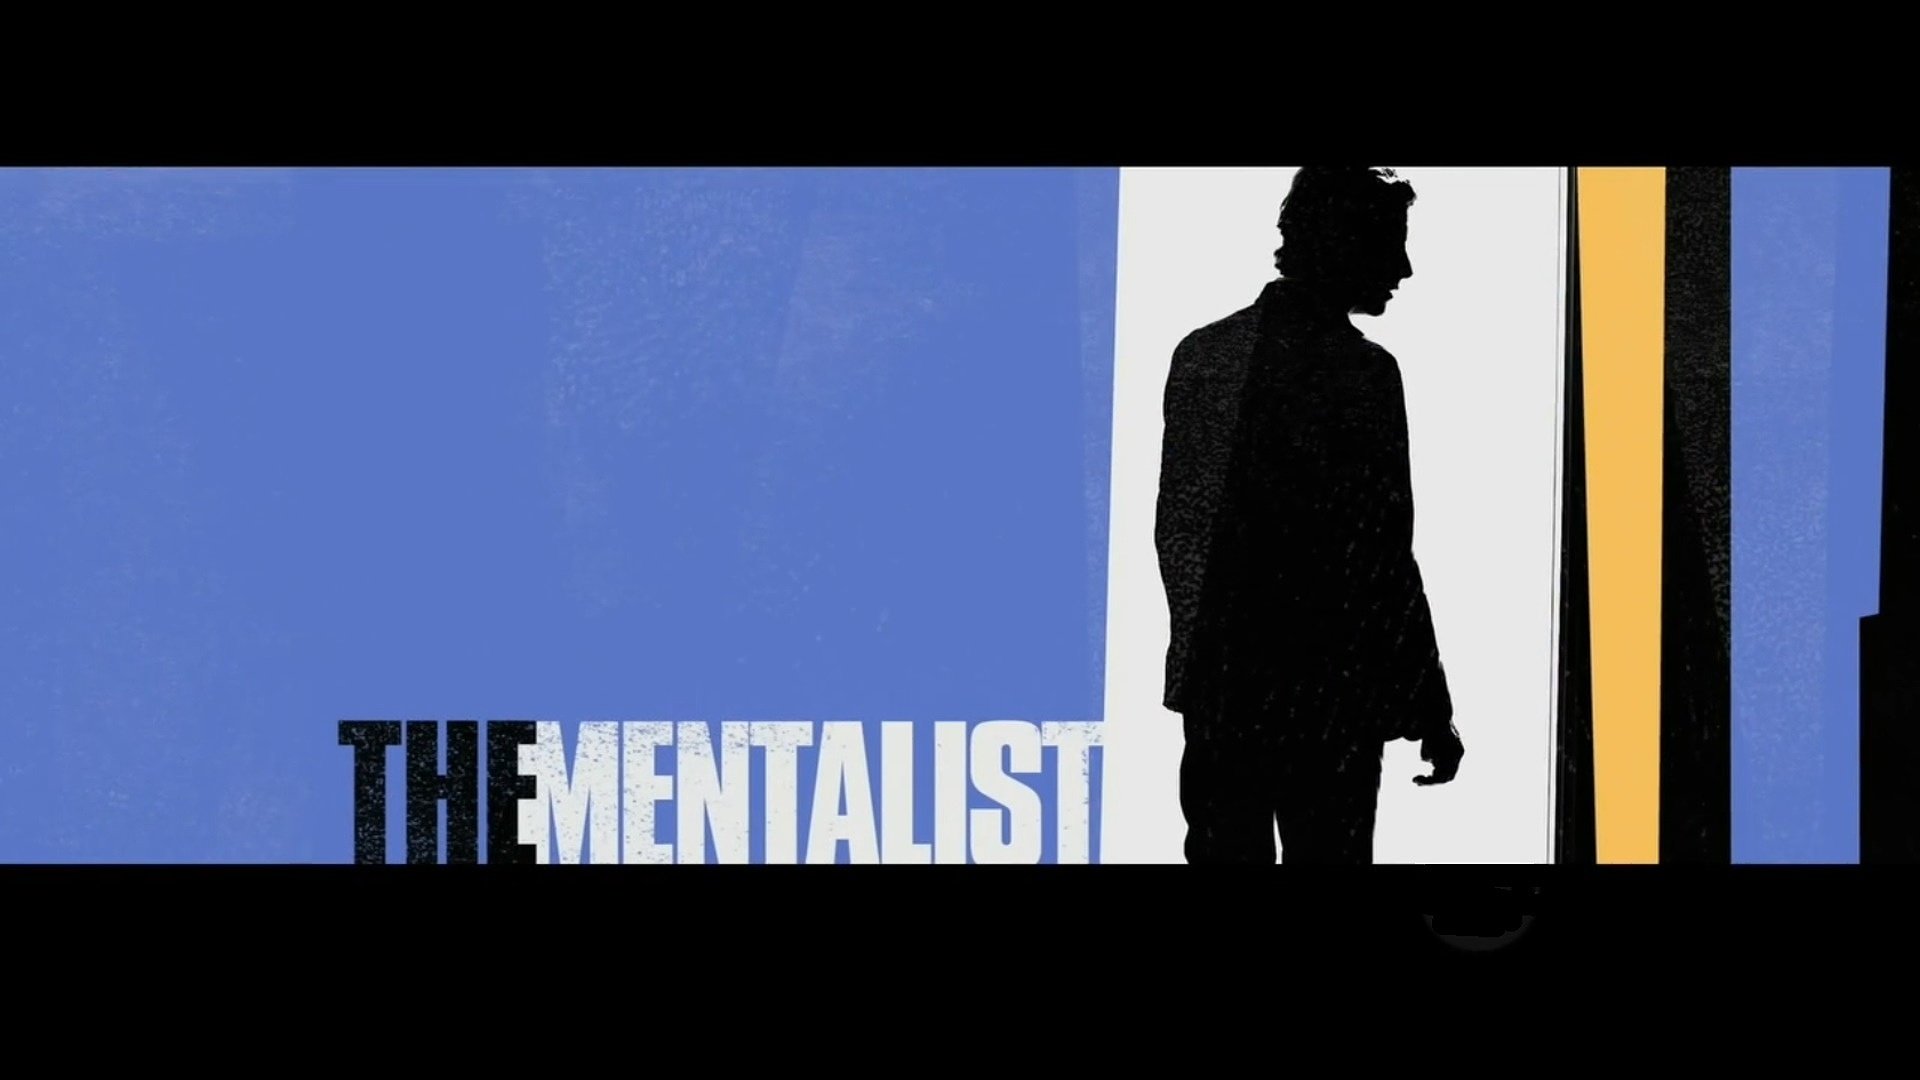 High resolution The Mentalist full hd wallpaper ID:186594 for computer